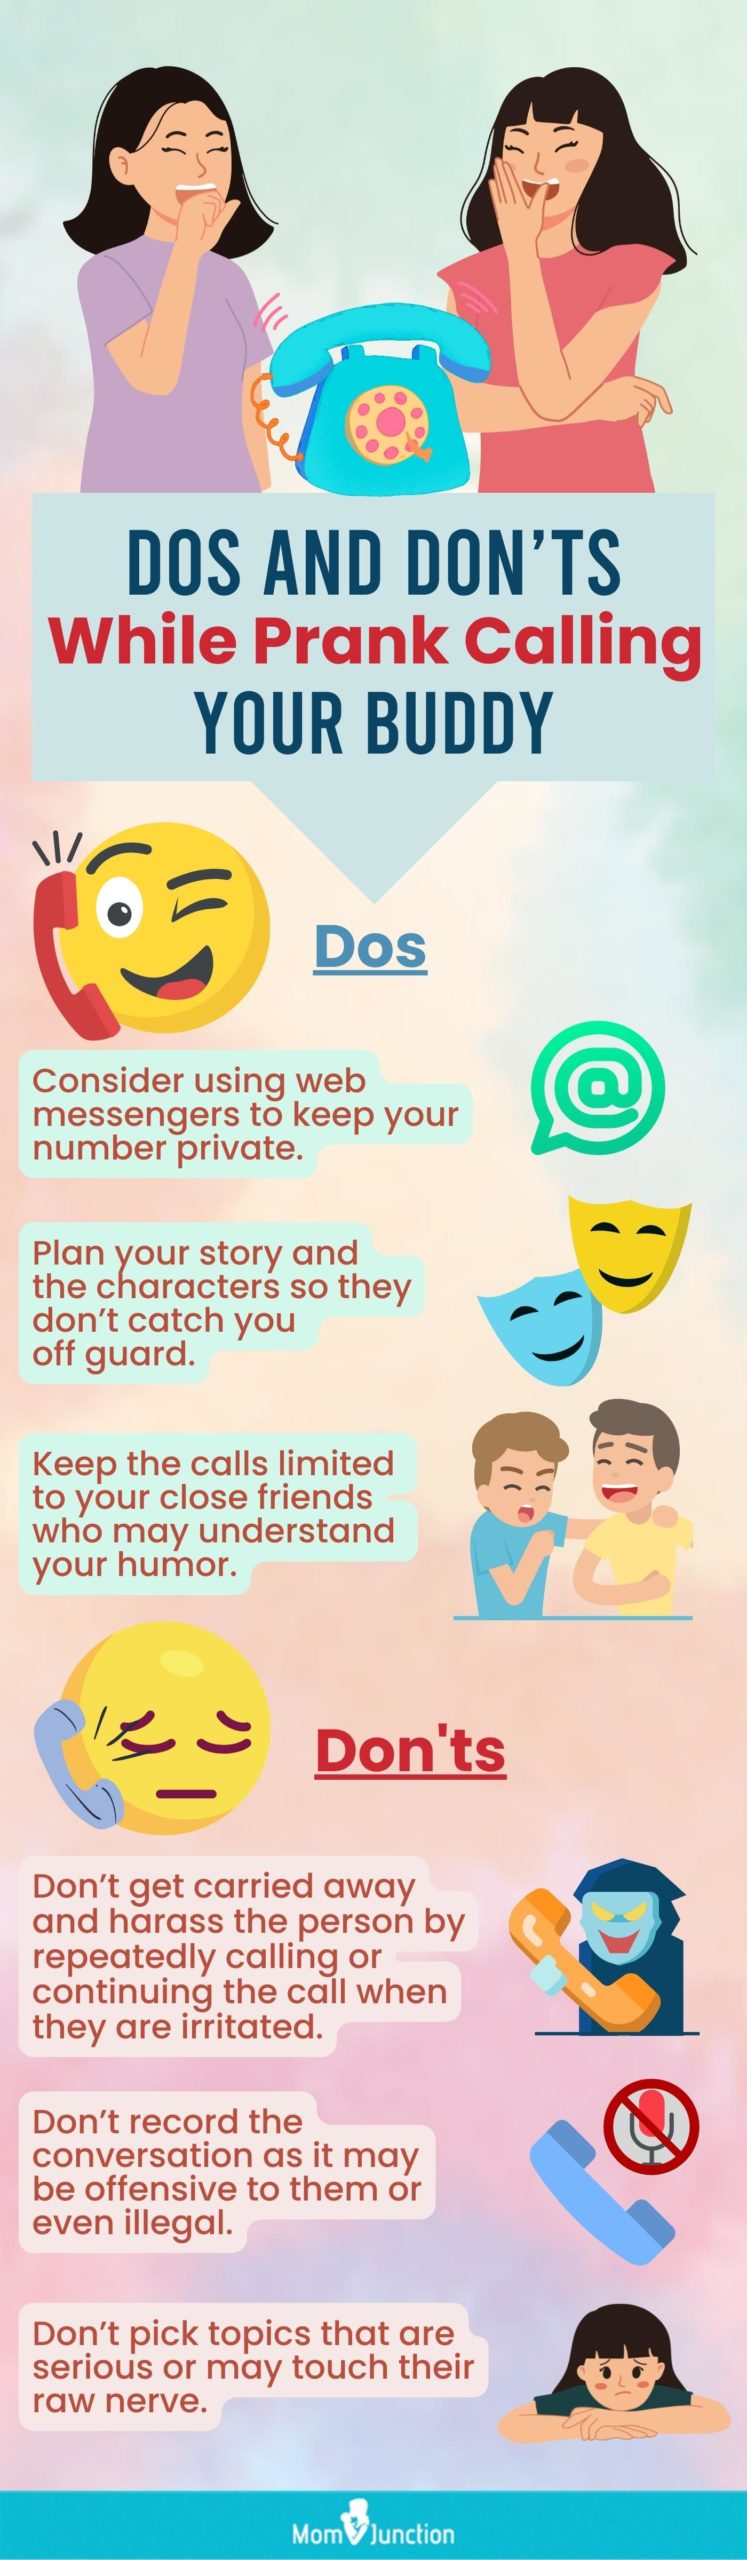 dos and donts while prank calling your buddy (infographic)